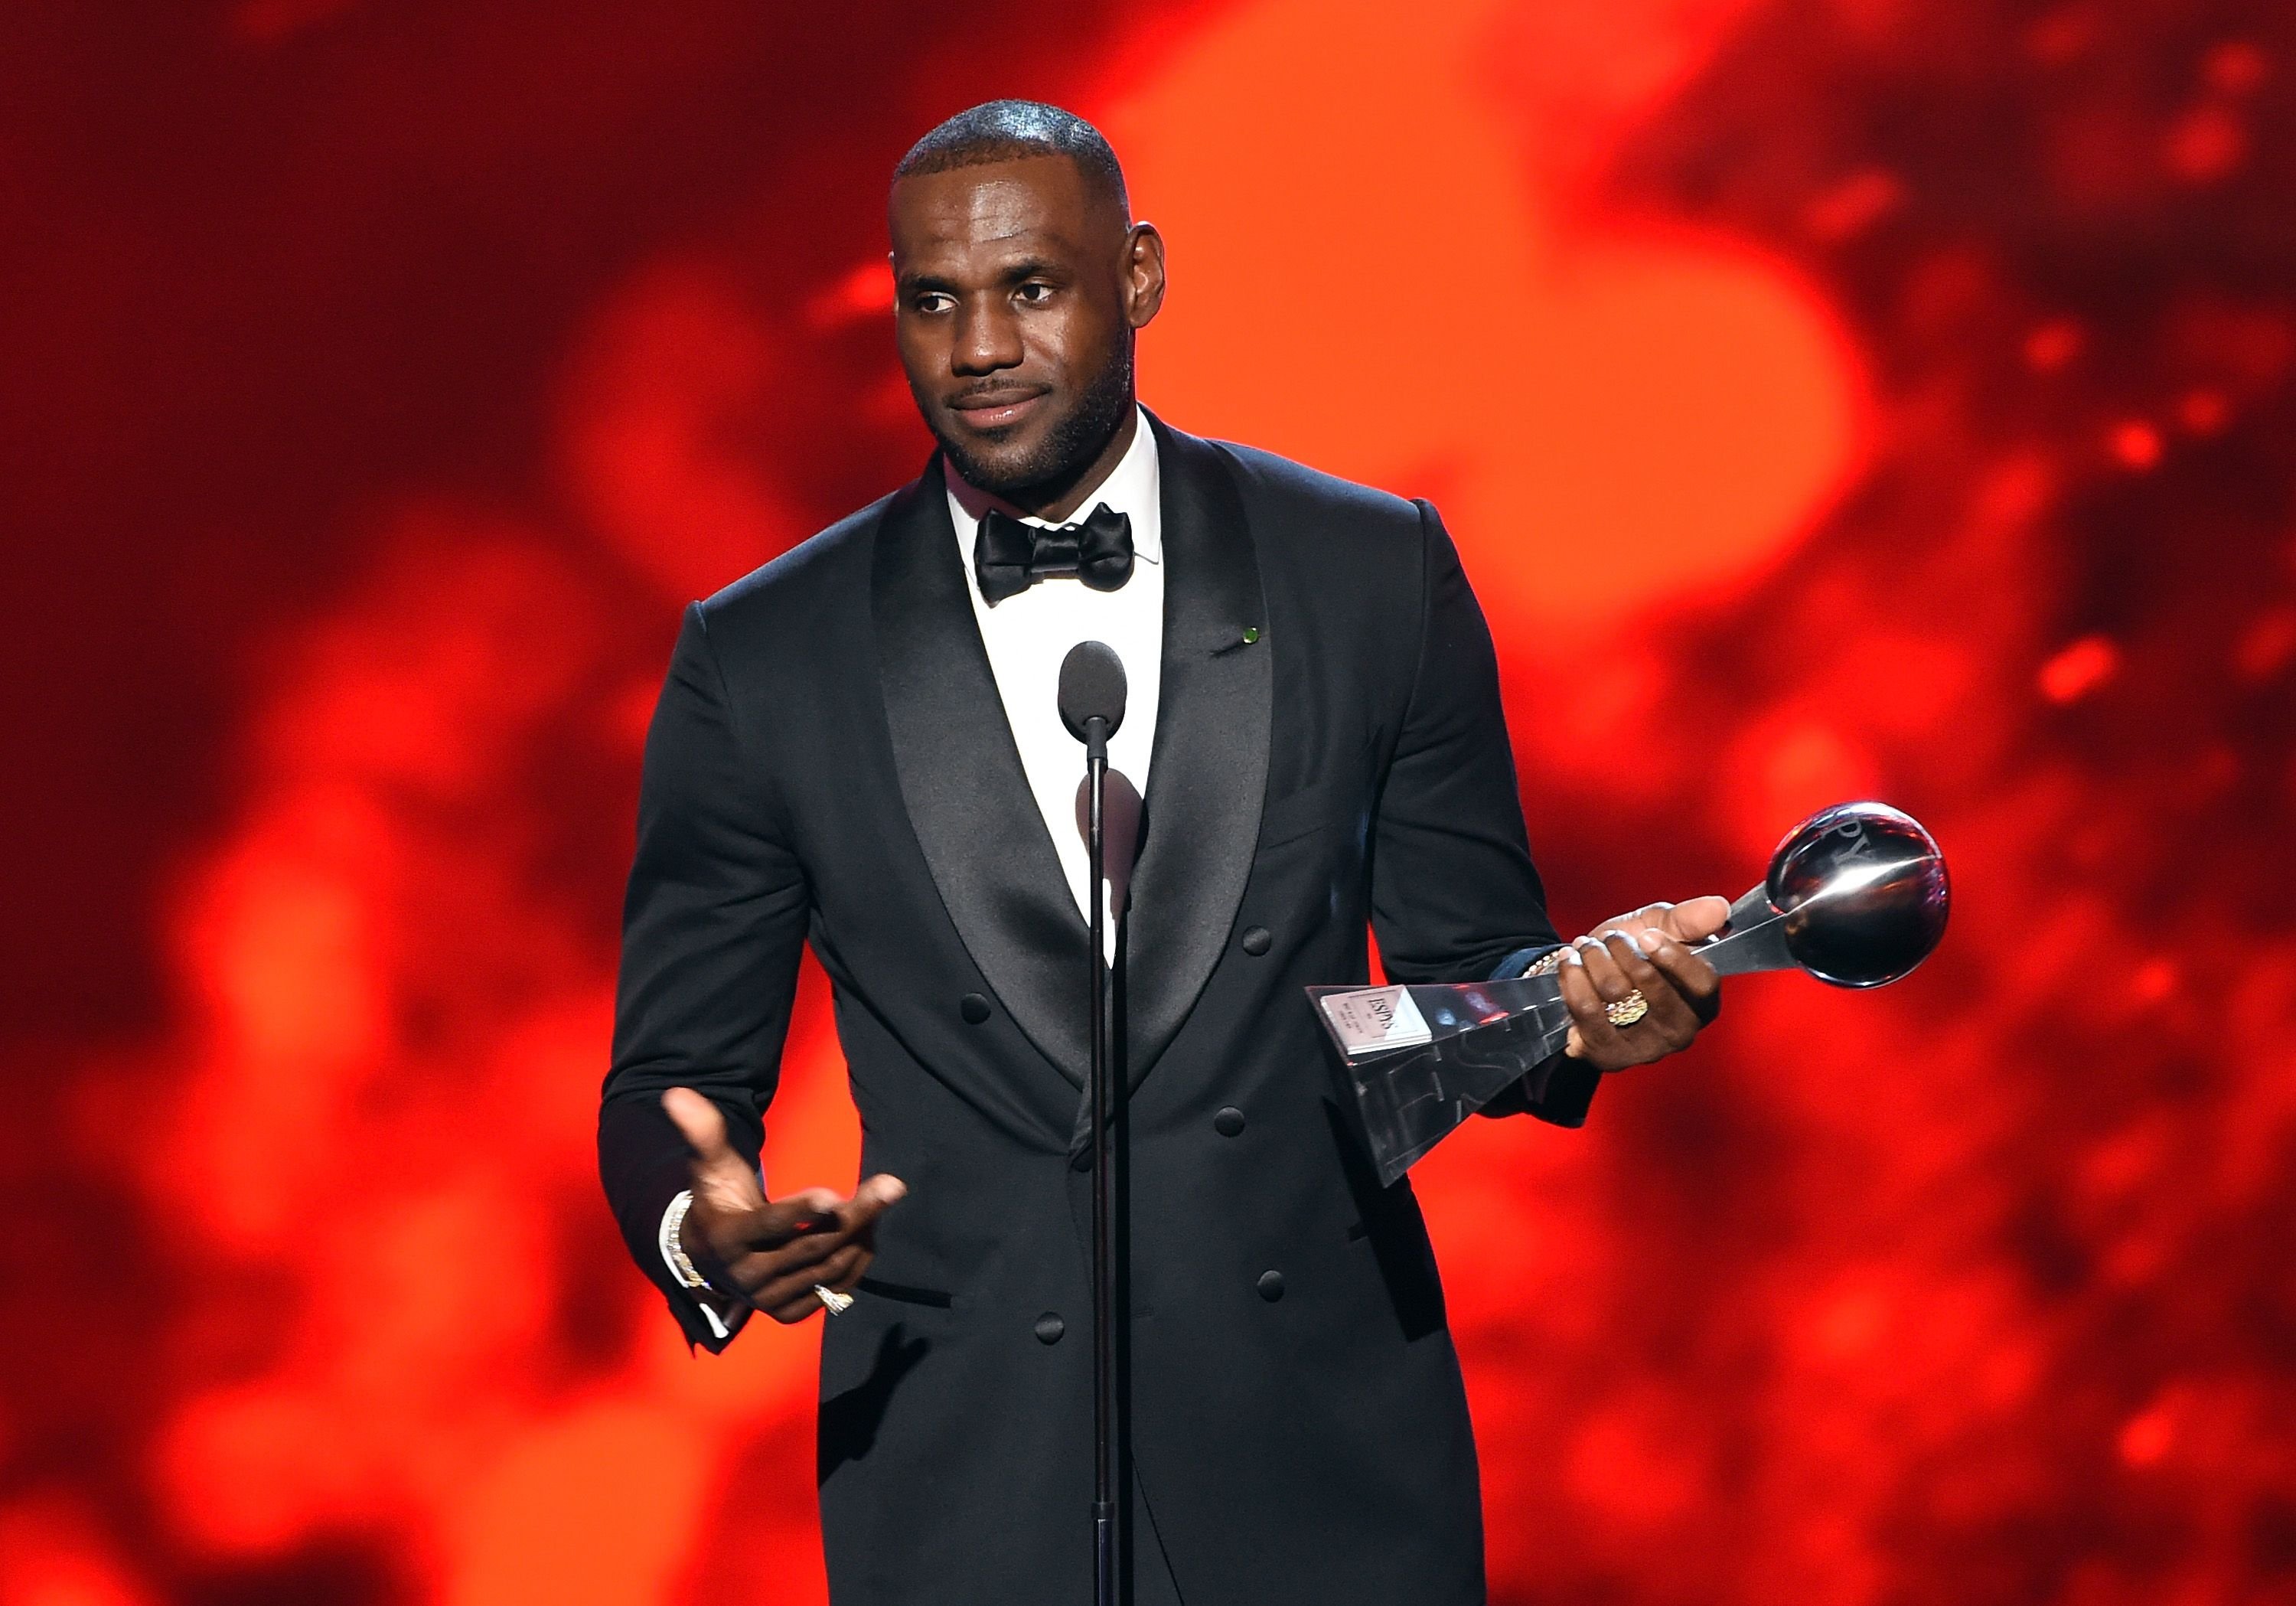 LeBron James accepted the Best Male Athlete award onstage during the 2016 ESPYS at Microsoft Theater on July 13, 2016 in Los Angeles, California | Photo: Getty Images